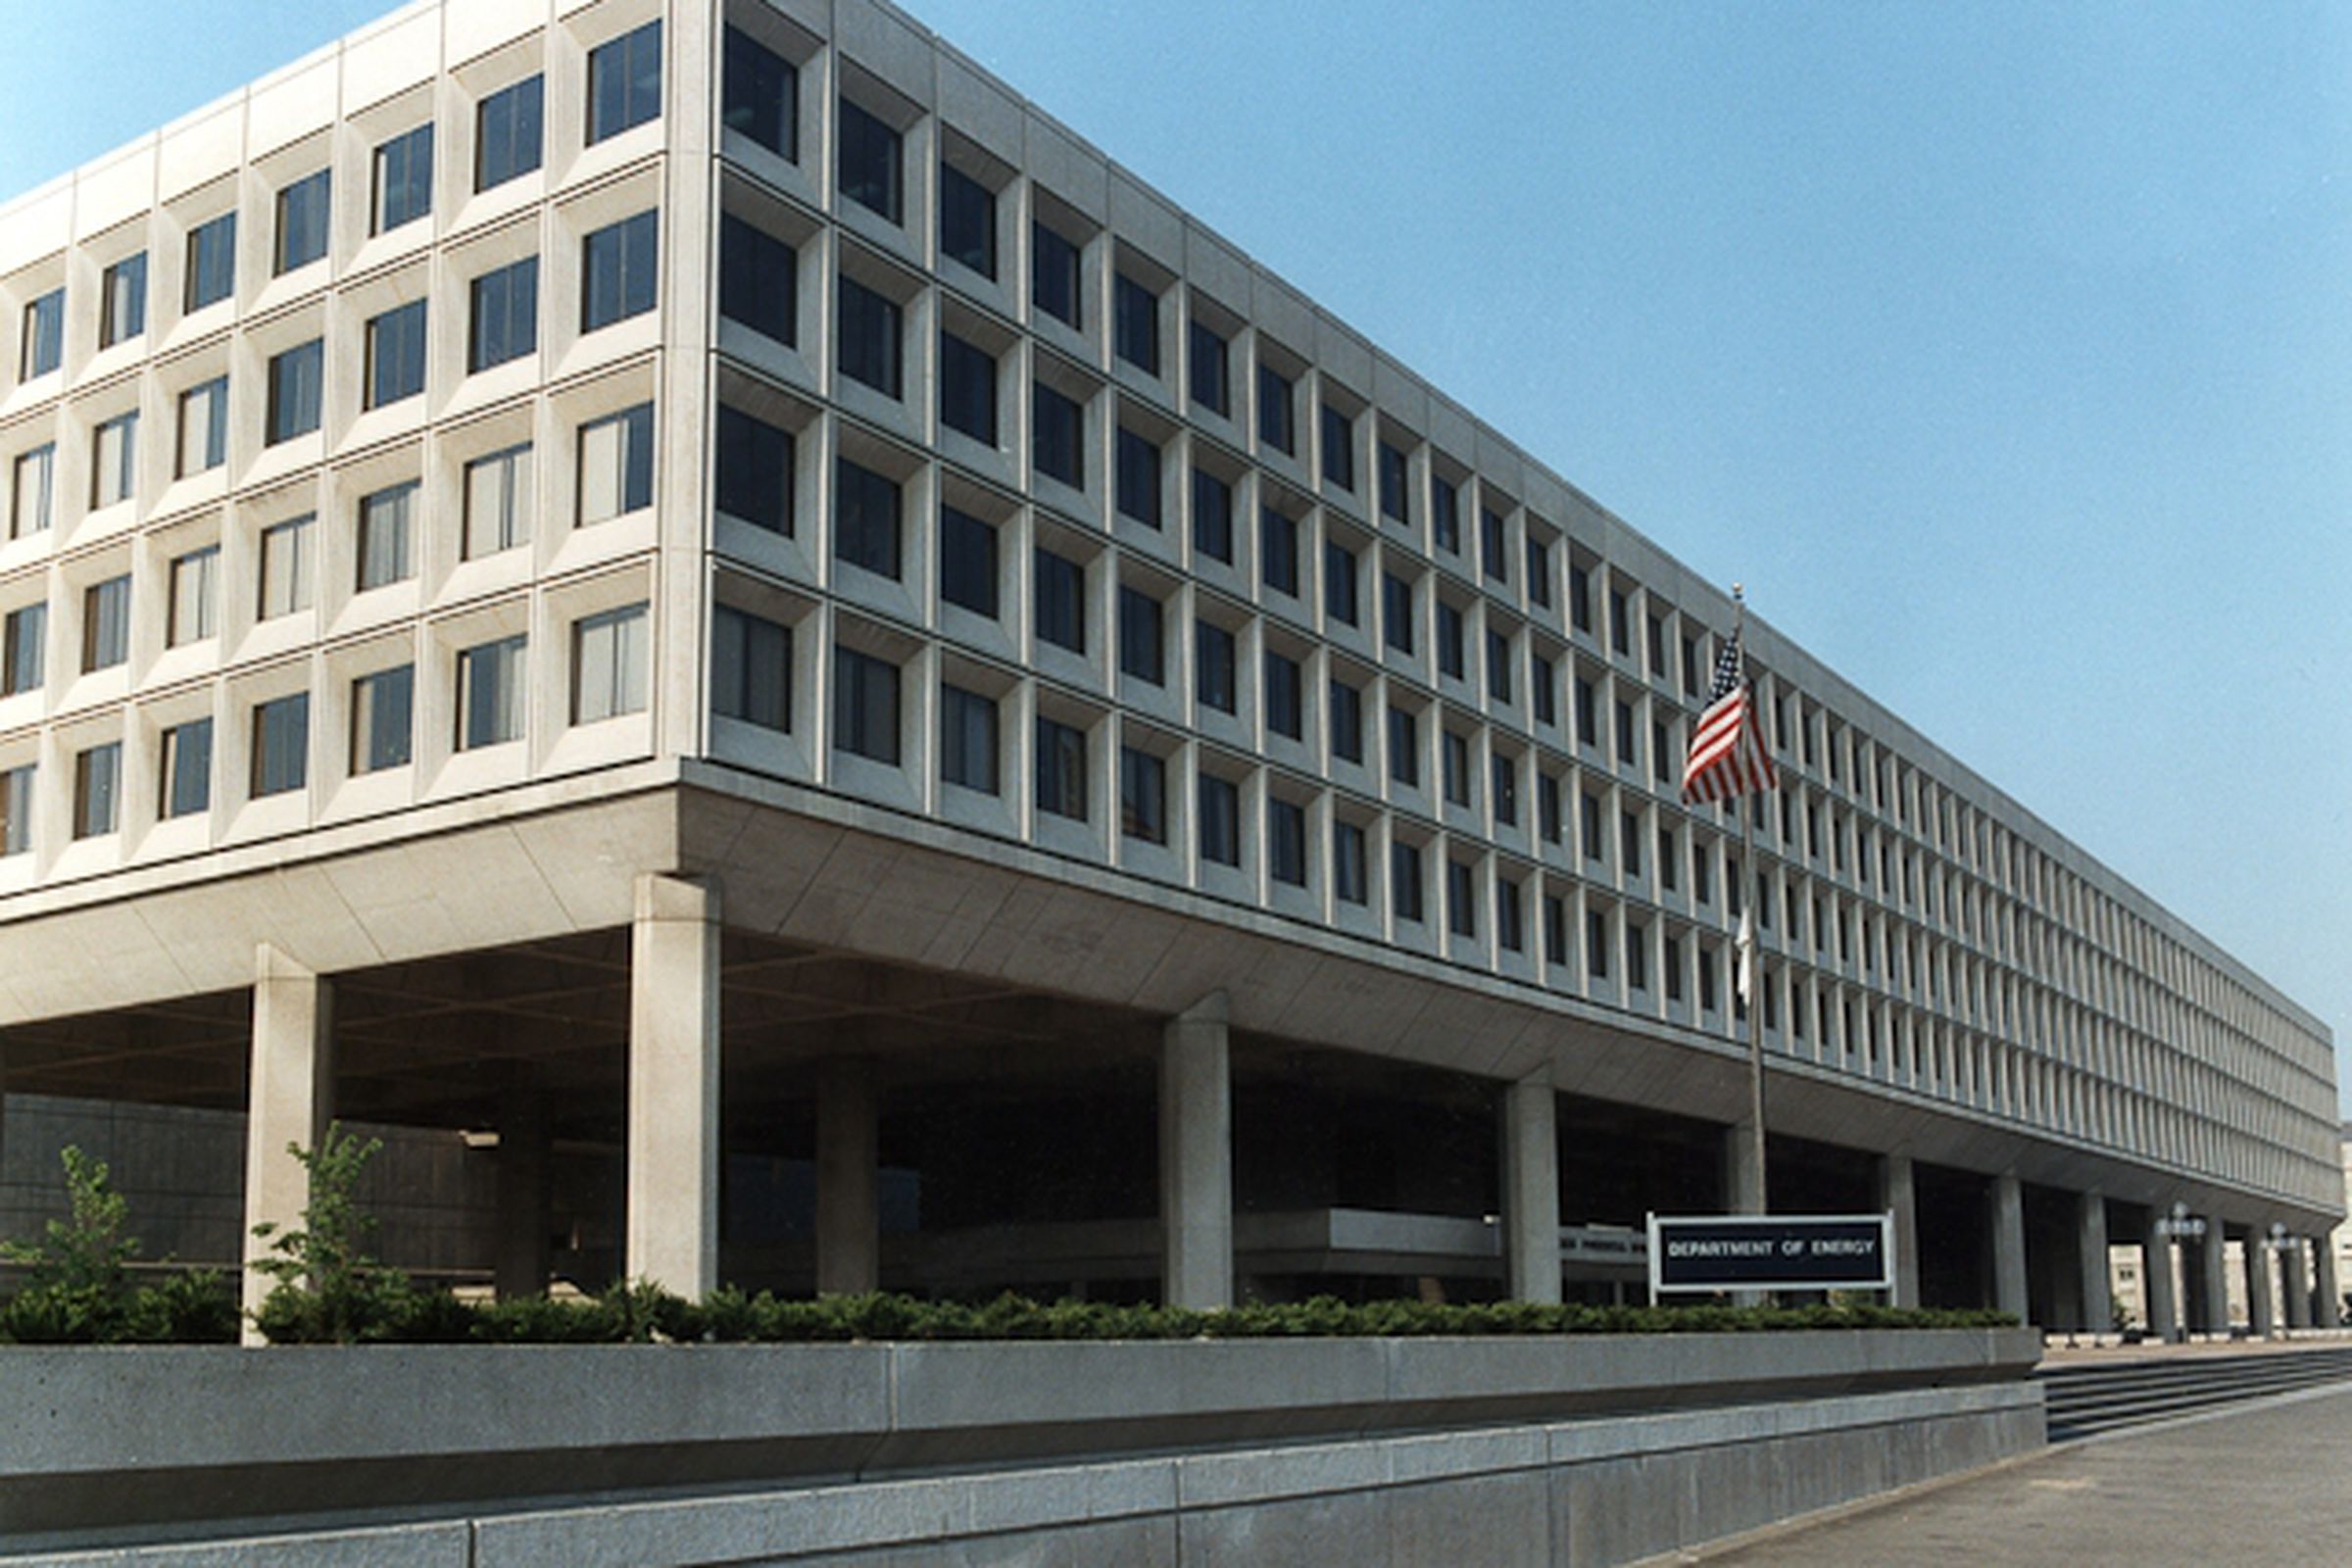 The Department of Energy headquarters in Washington, DC